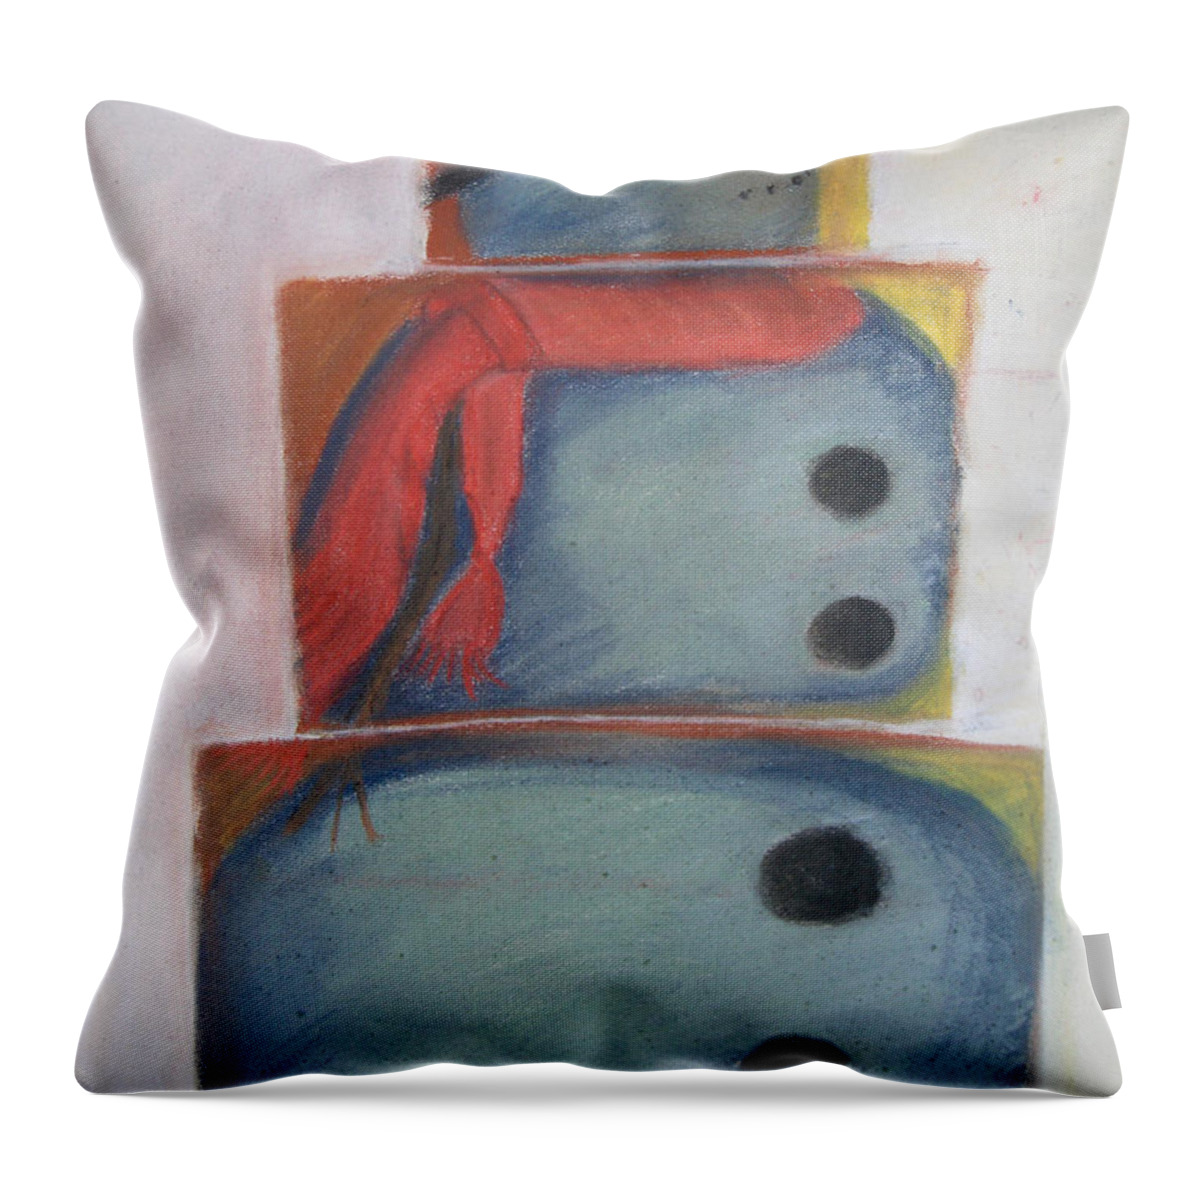 Snowman Throw Pillow featuring the painting S'no Man by Claudia Goodell